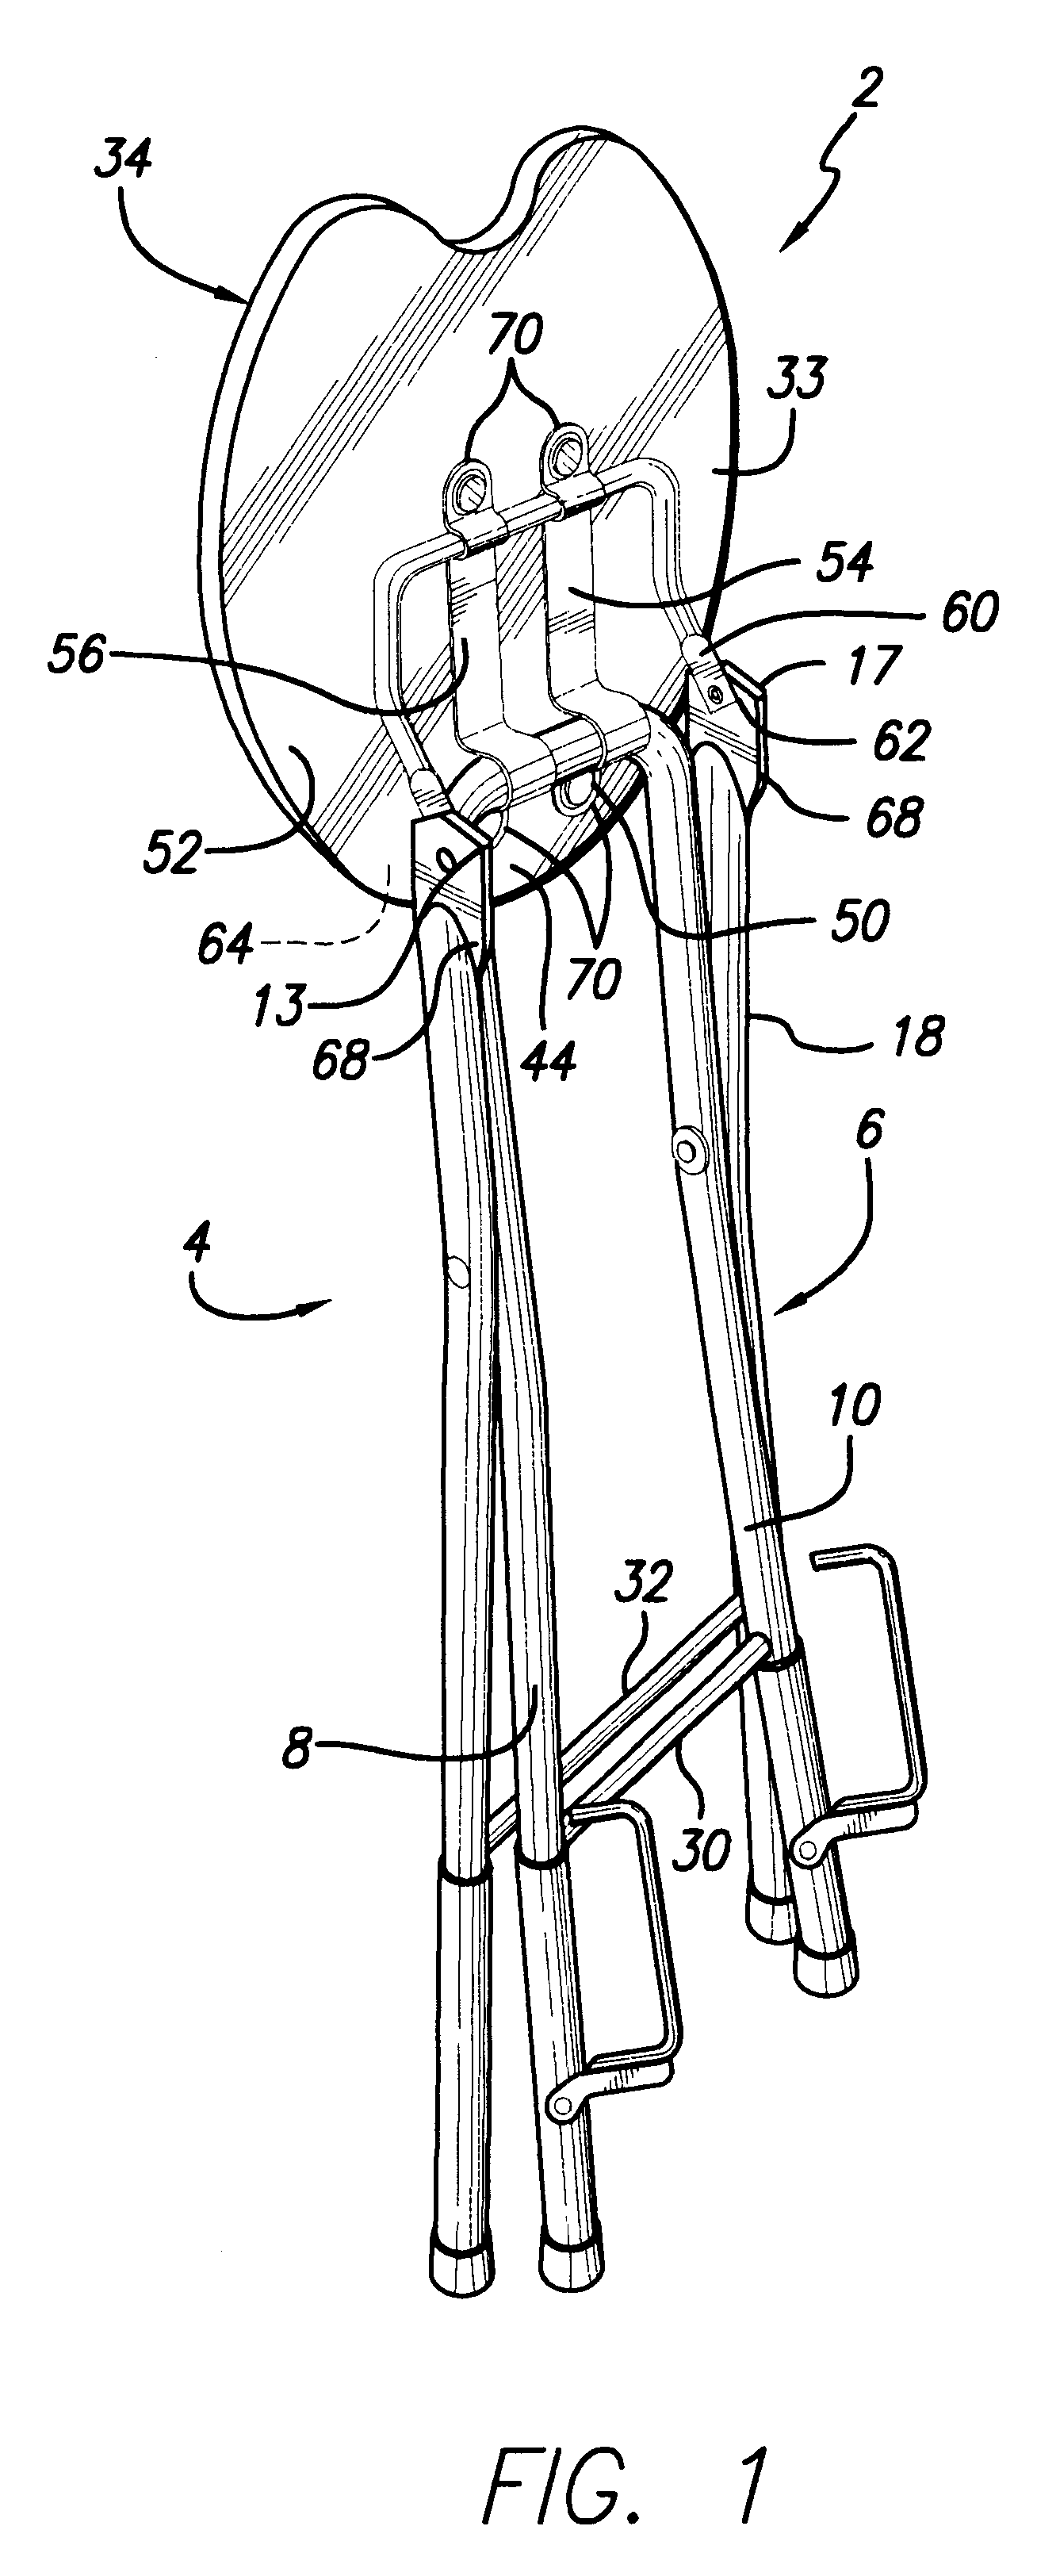 Foldable stool and stringed instrument stand